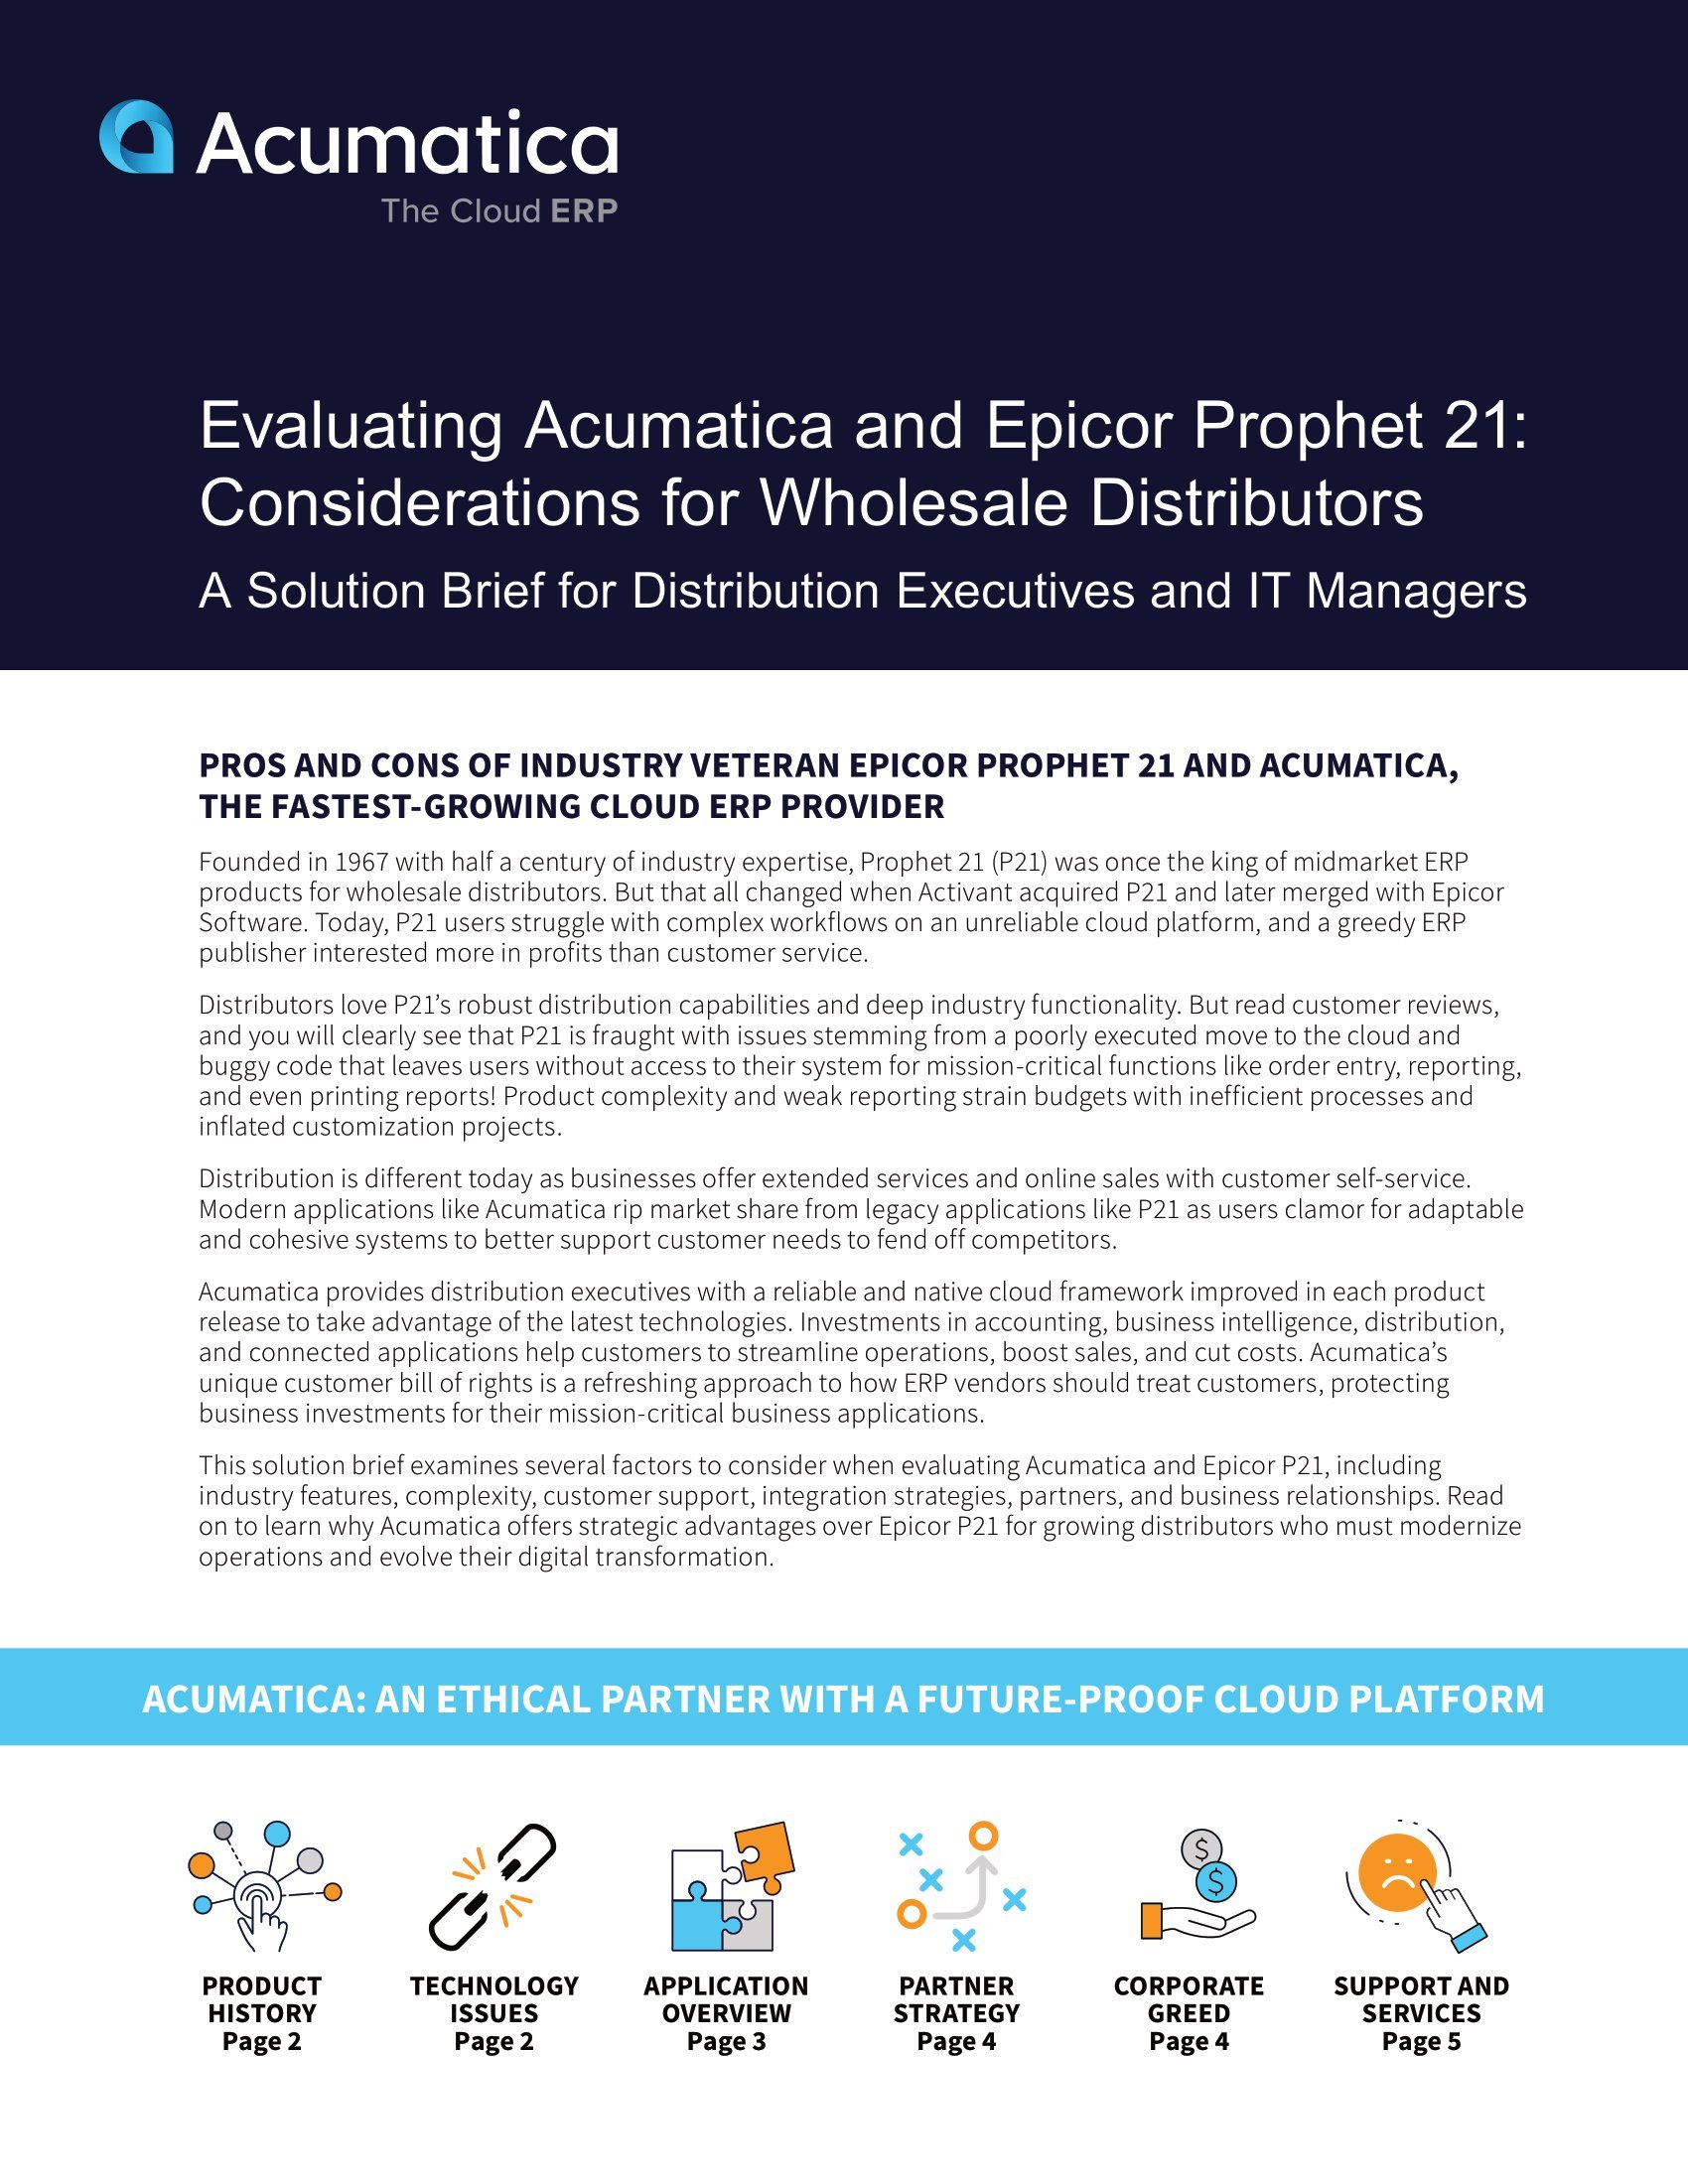 Wholesale Distributors: Discover the Pros and Cons of Acumatica and Epicor Prophet 21